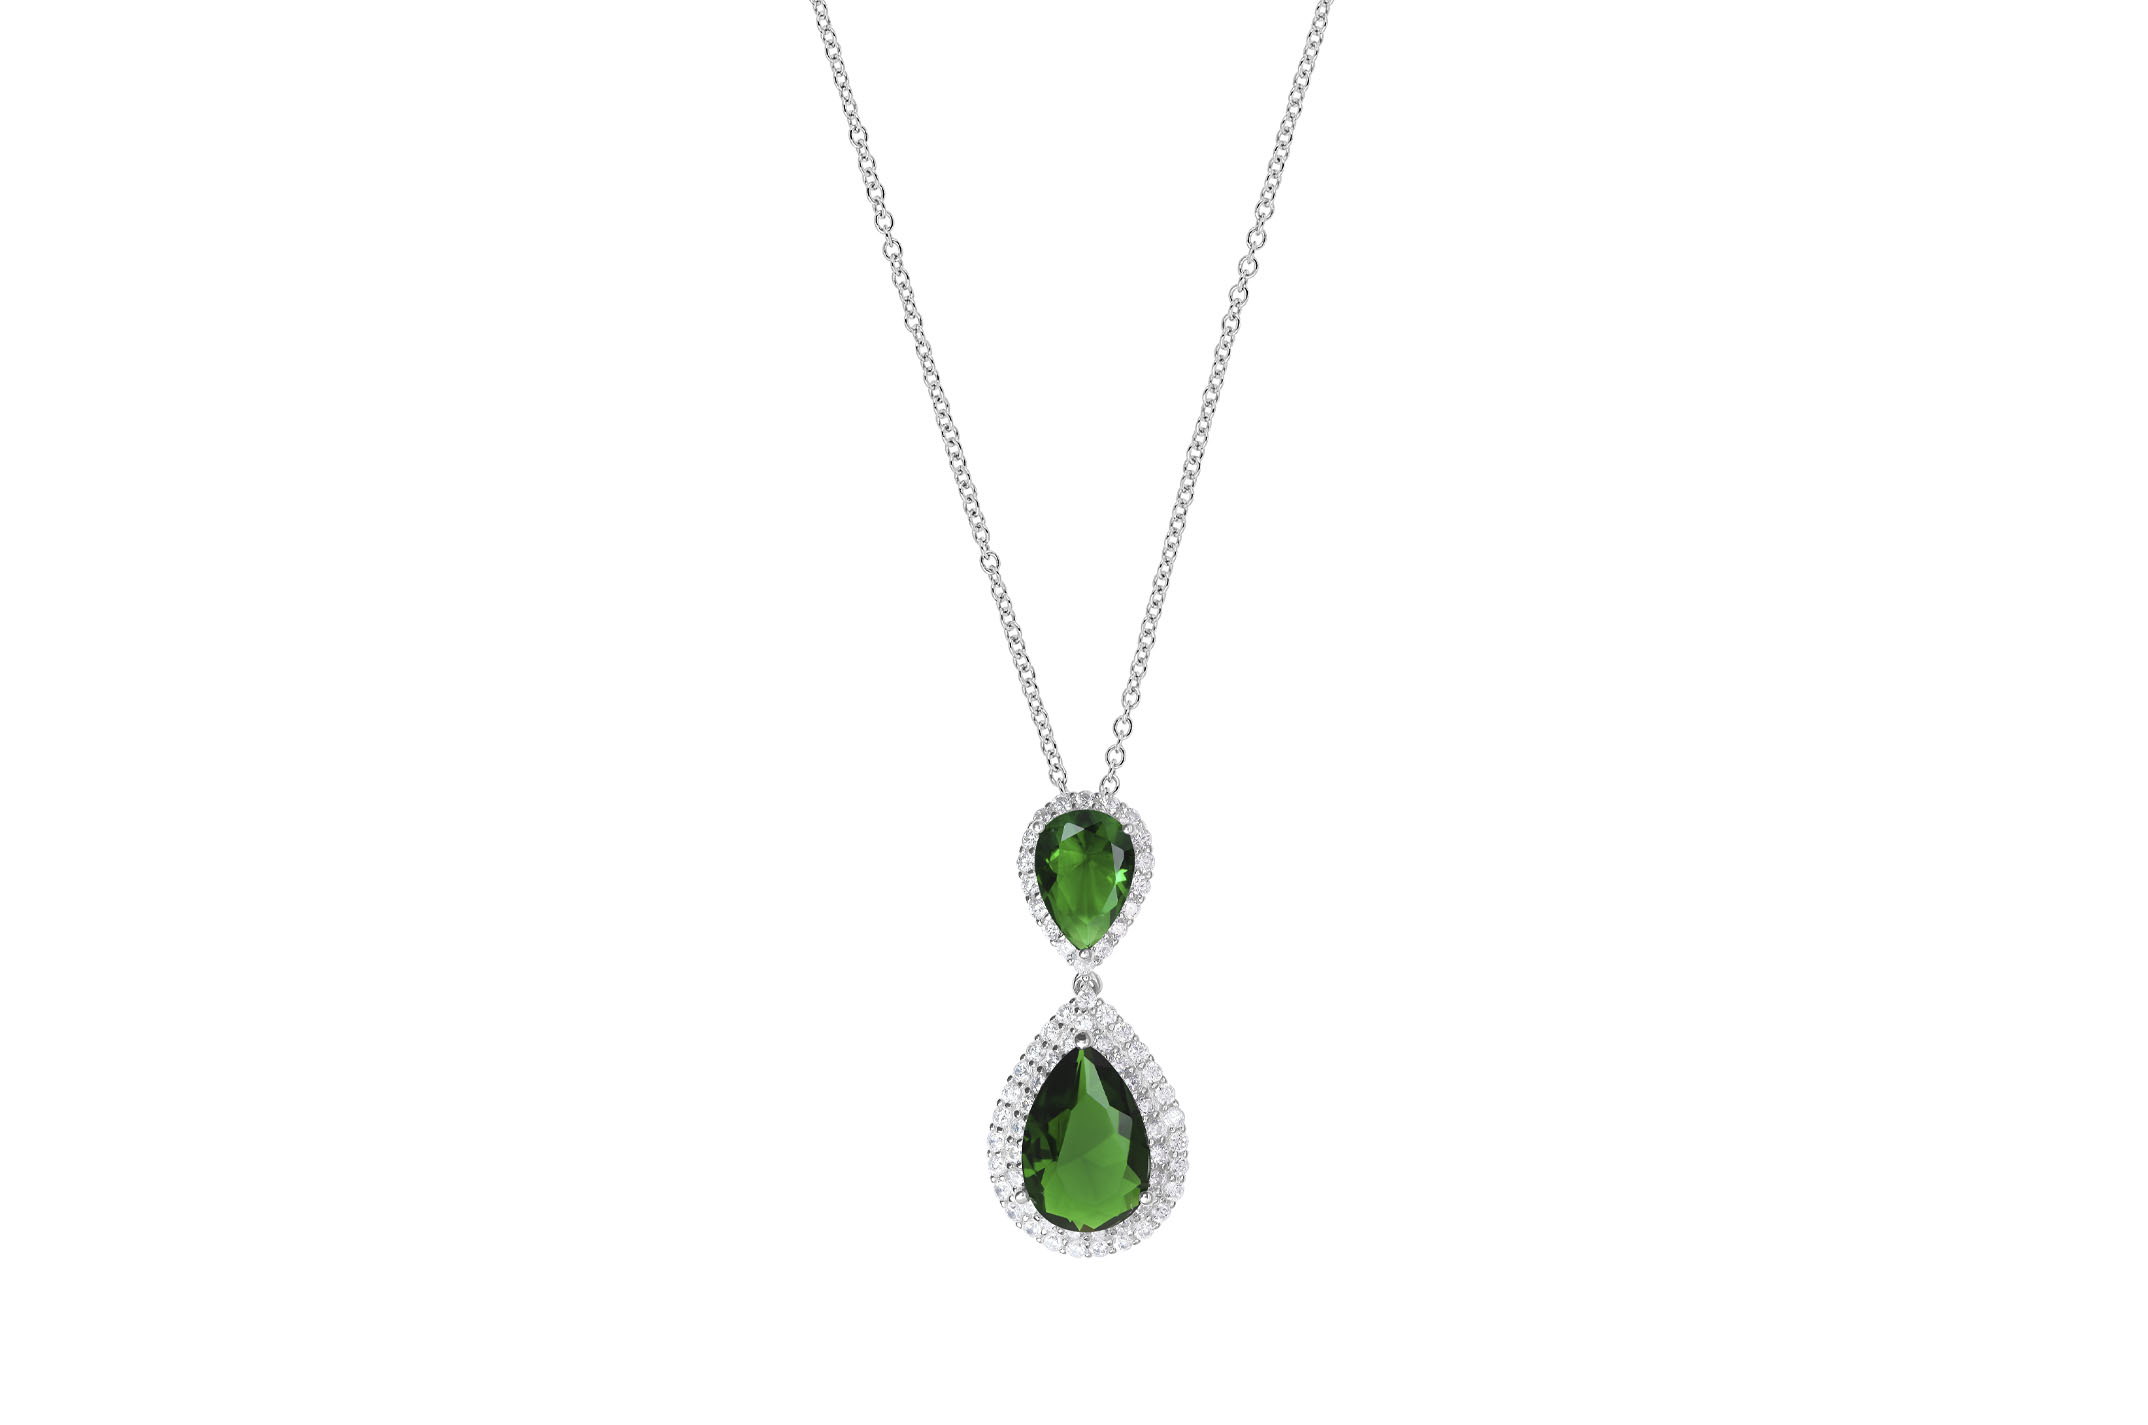 Jewel: necklace;Material: silver 925;Weight: 6.7 gr;Stone: zirconias;Color: white;Size: 40 cm + 5 cm;Pendent size: 3 cm;Gender: woman